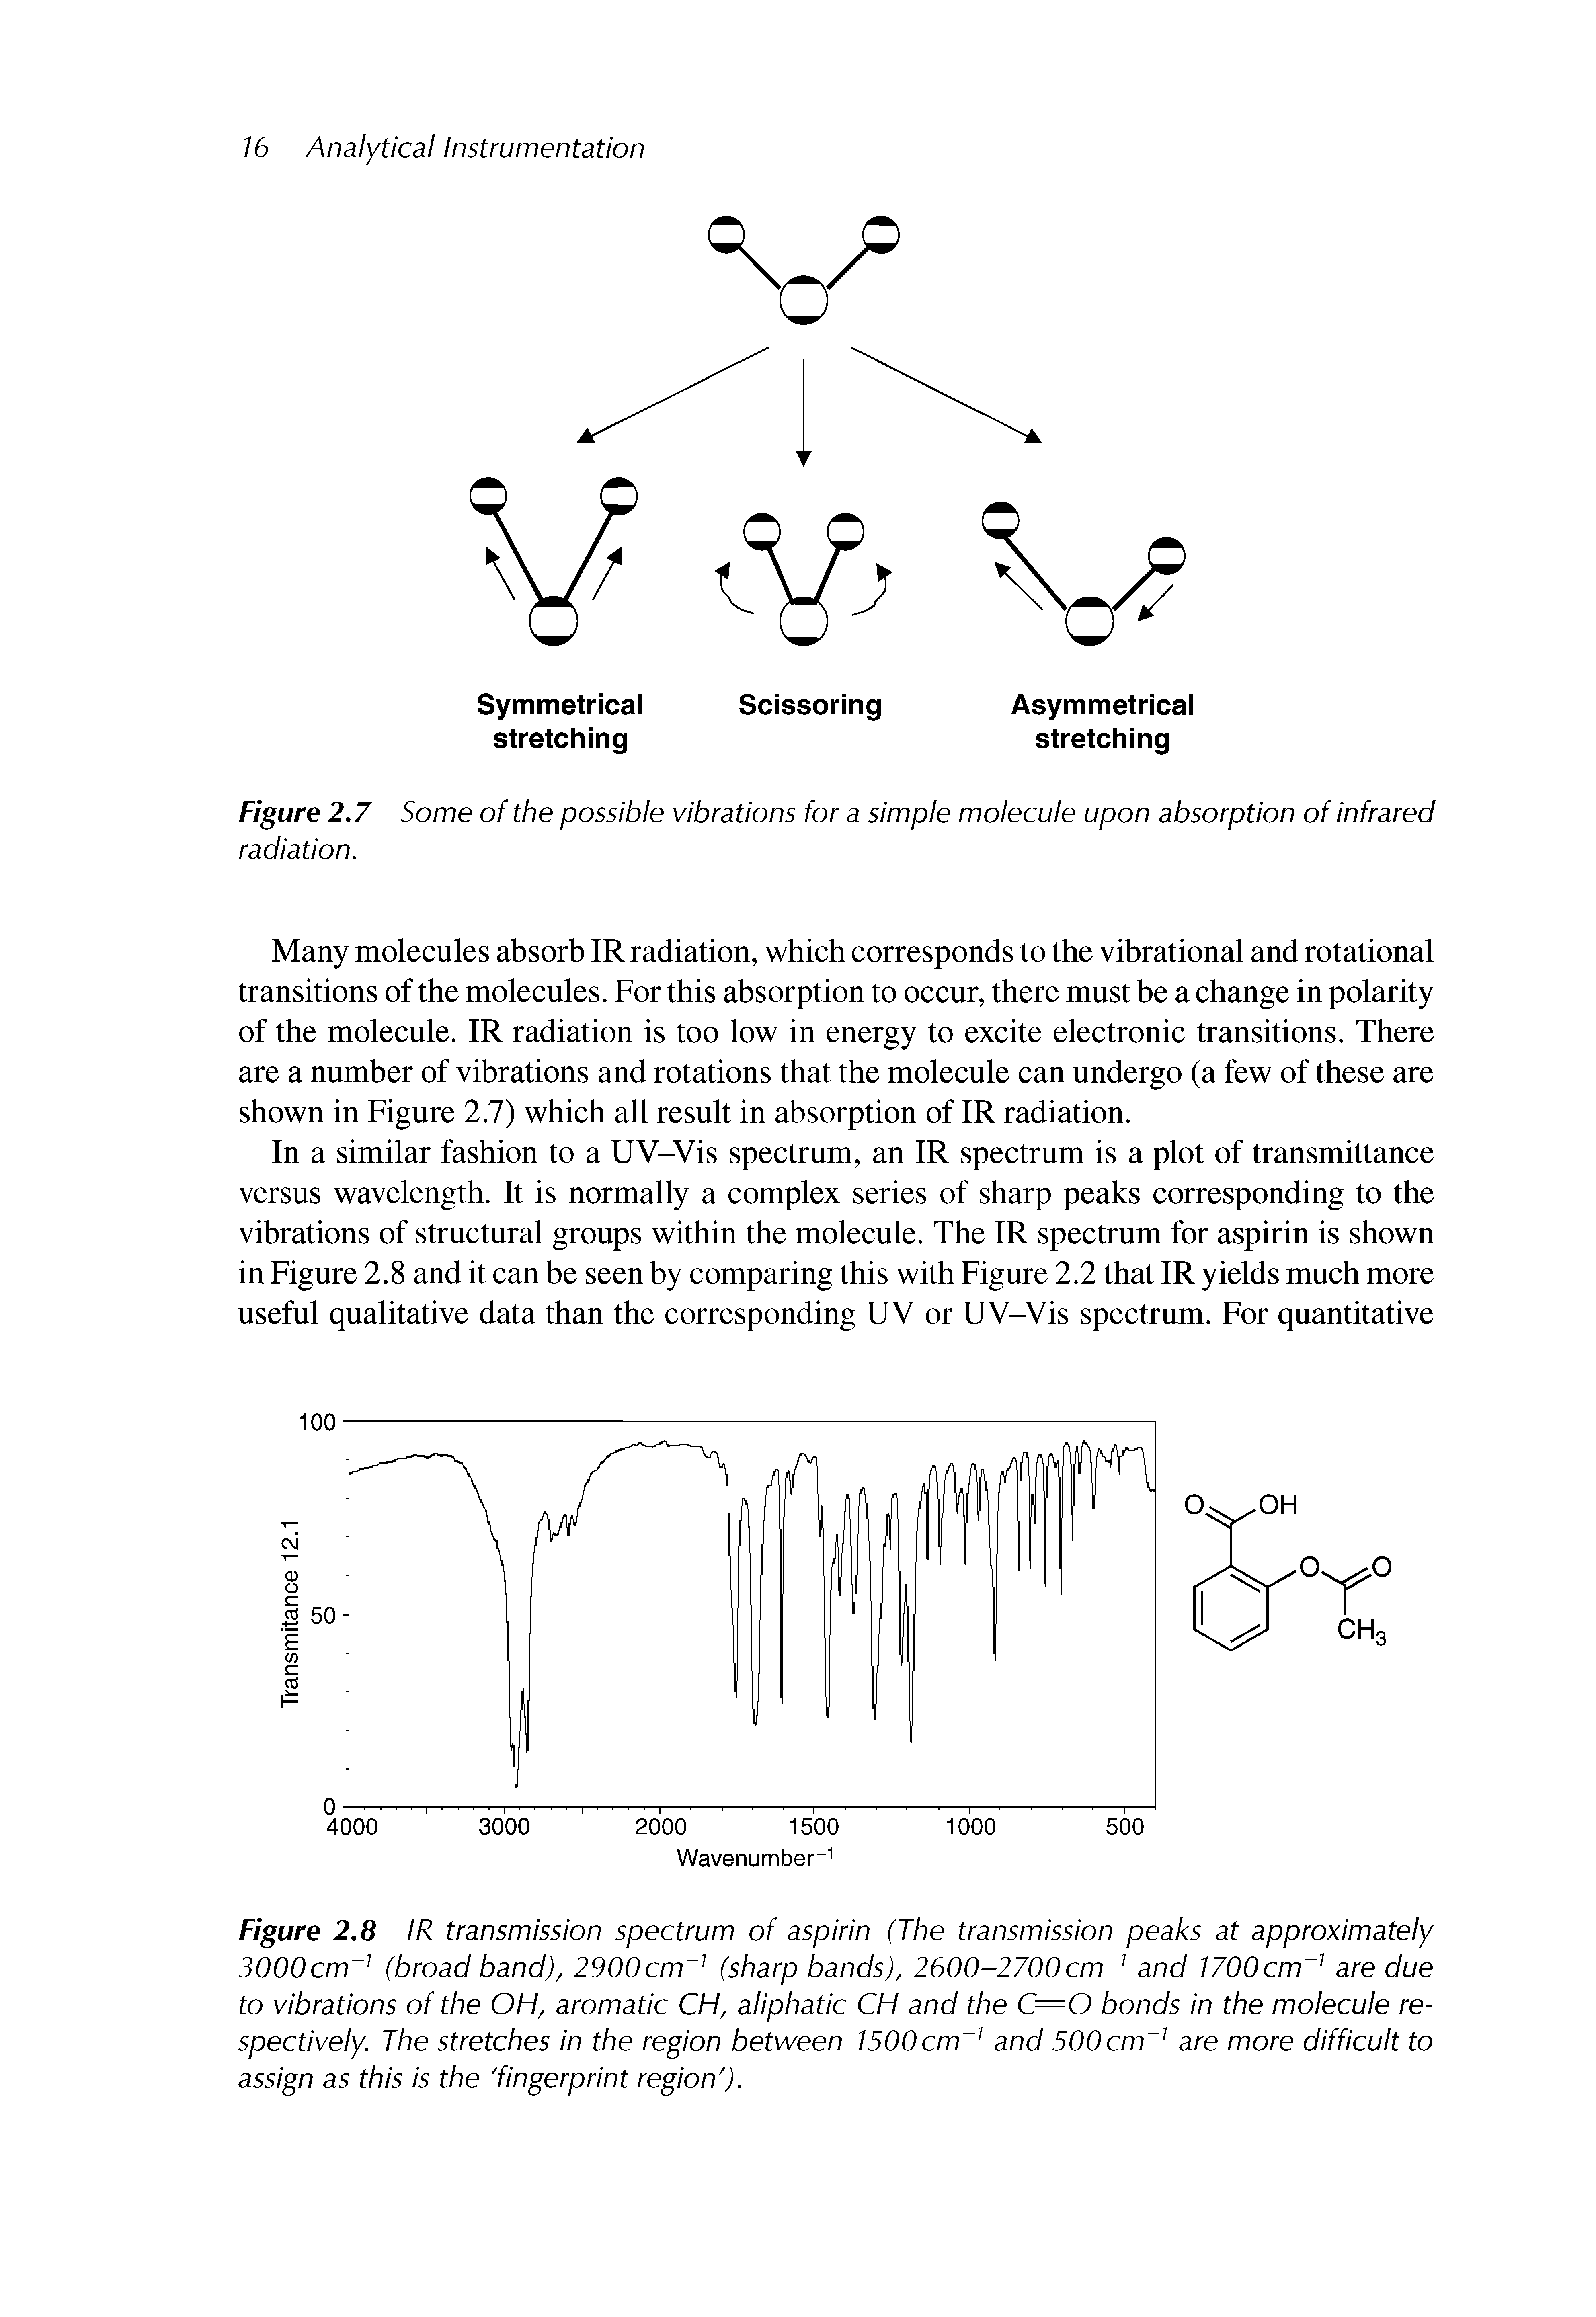 Figure 2,8 IR transmission spectrum of aspirin (The transmission peaks at approximately 3000cm (broad band), 2900cm (sharp bands), 2600-2700cm and I700cm are due to vibrations of the OH, aromatic CH, aliphatic CH and the C=0 bonds in the molecule respectively. The stretches in the region between I500cm and 500cm are more difficult to assign as this is the fingerprint region ).